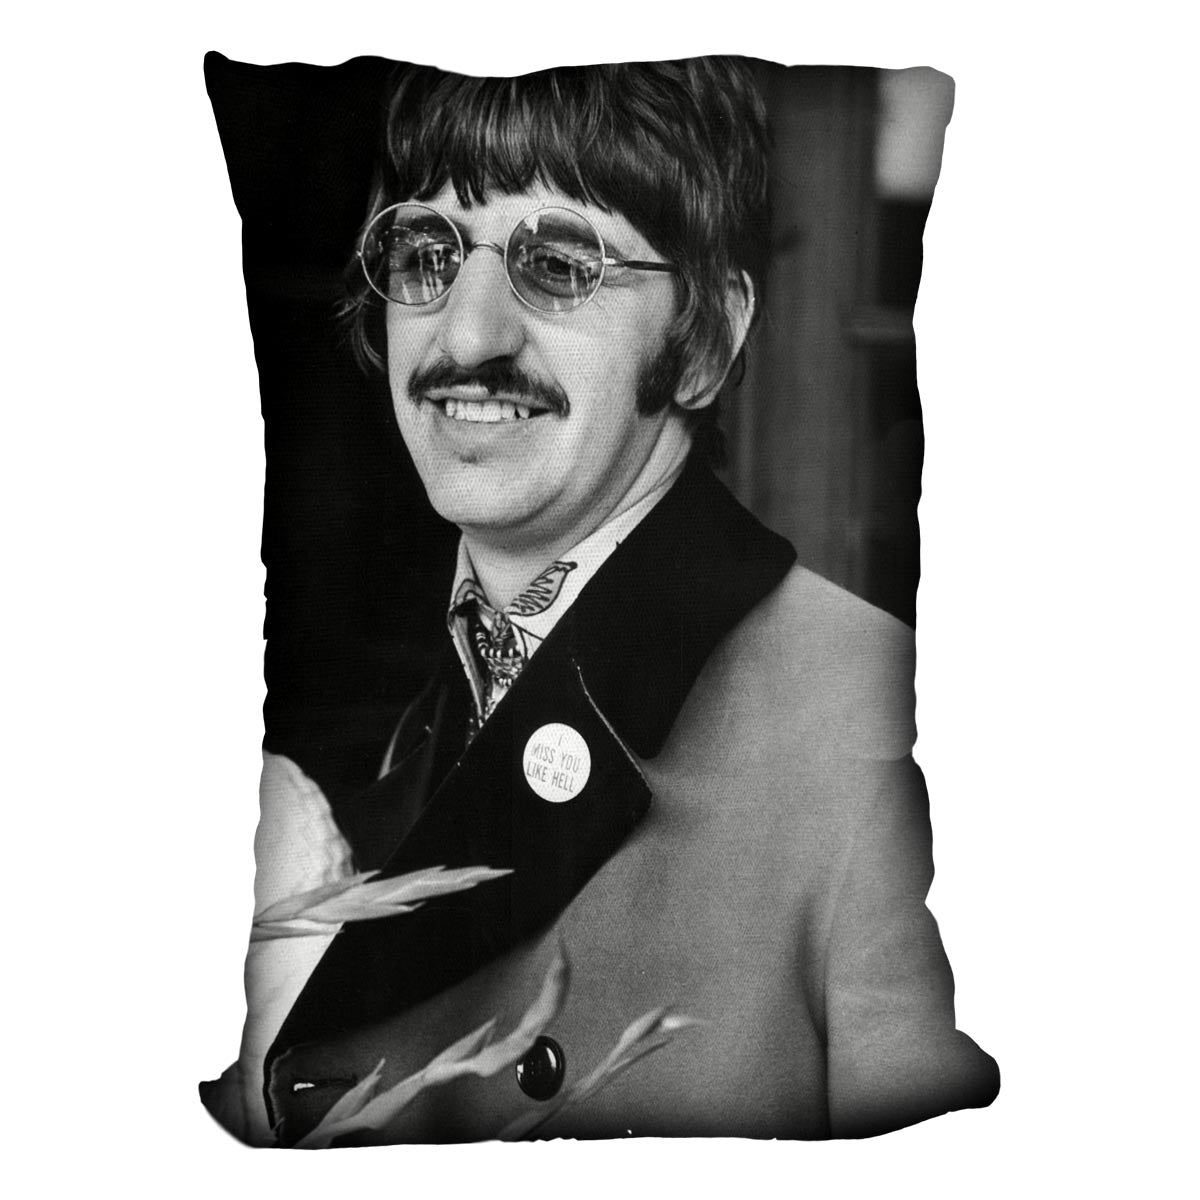 Ringo Starr of The Beatles in 1967 Cushion